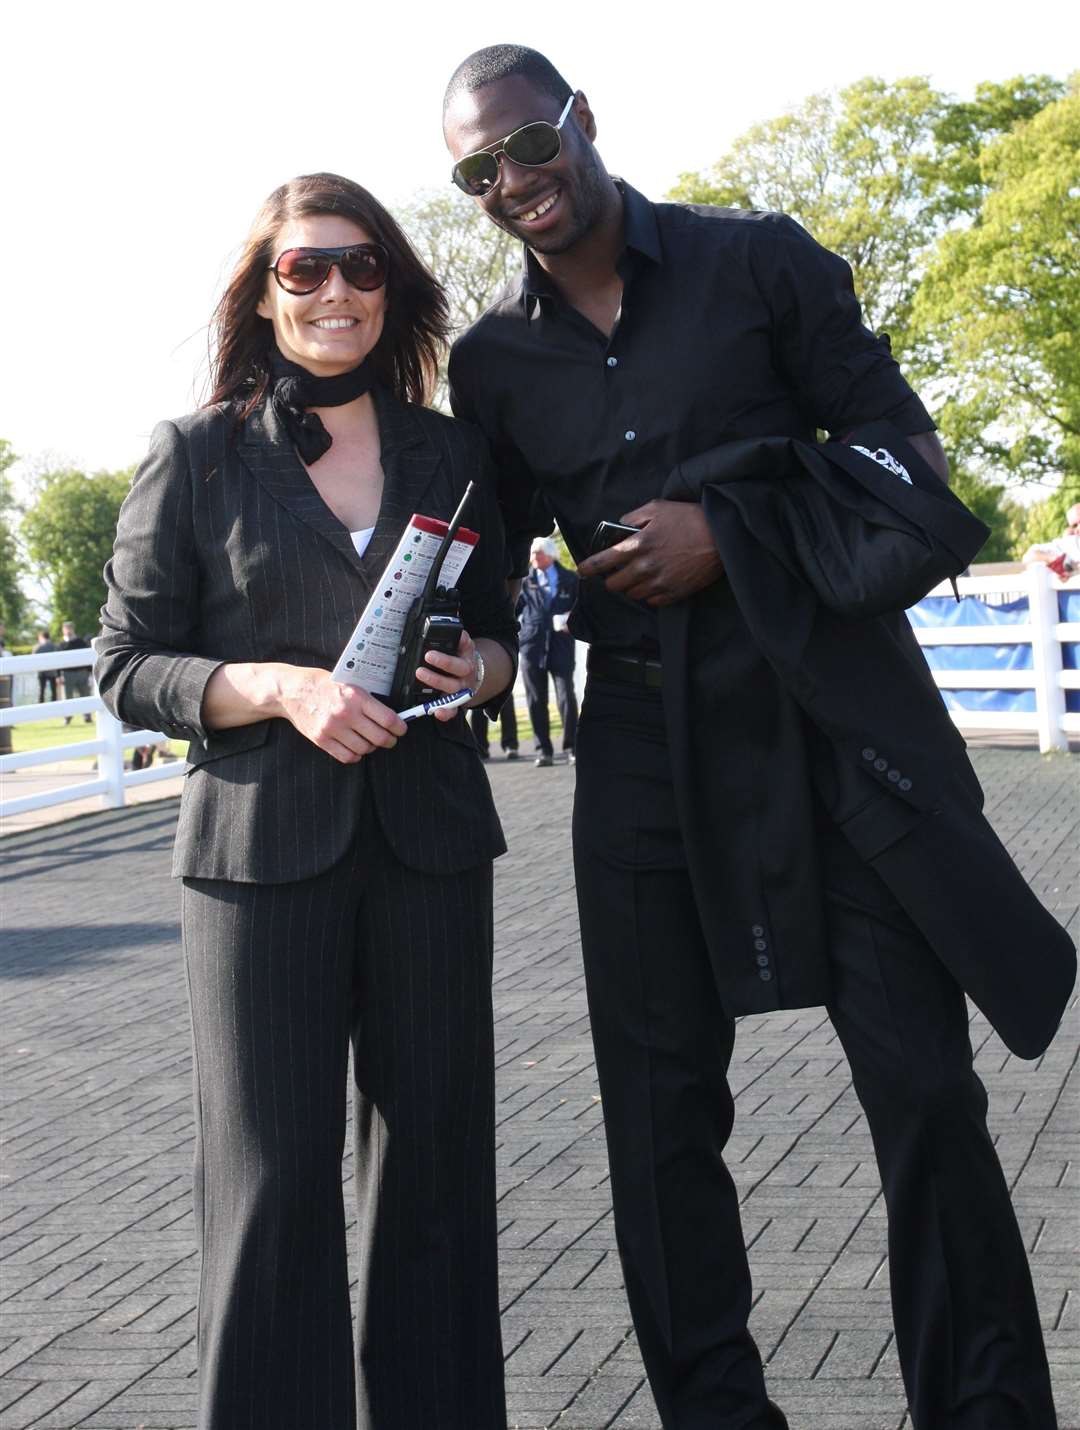 Racecourse manager Emma Santer and Tottenham Hotspur captain Ledley King at Folkestone Racecourse in May 2009. The centre-back was part-owner of fancied chestnut gelding 'King of Defence' - which finished third in the 4.30pm. Picture: Chris Denham